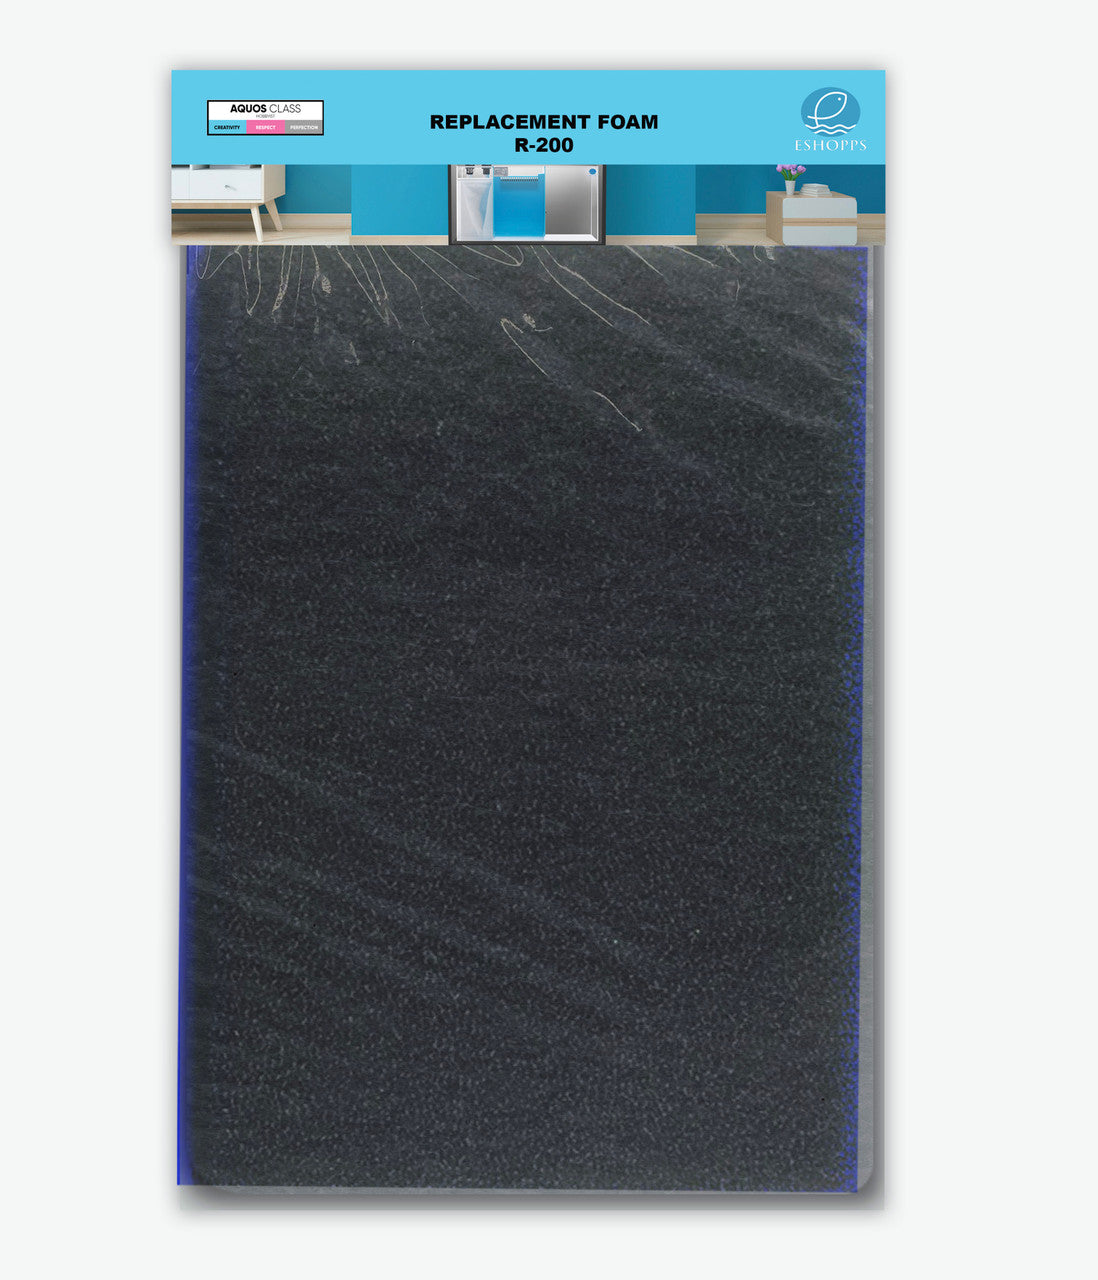 Eshopps Replacement Foam for Refugium Filters For R-200 Black